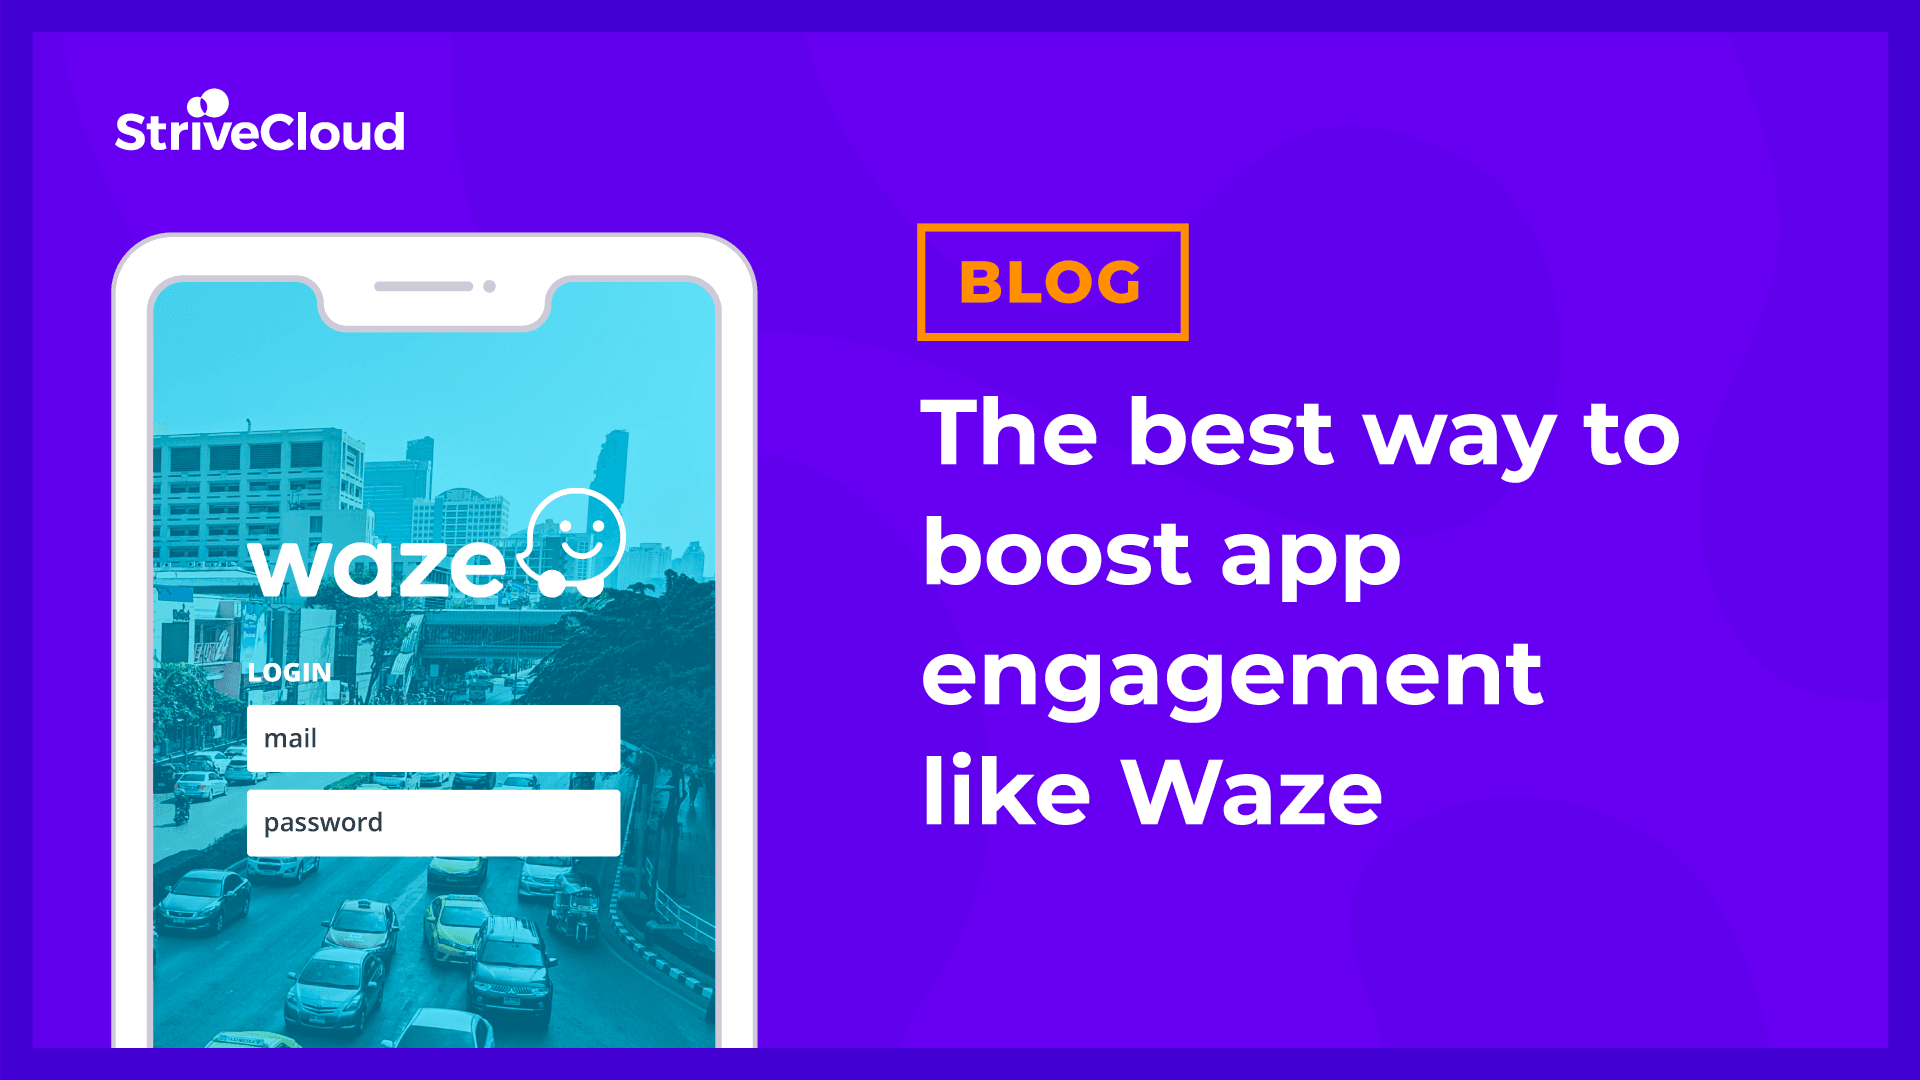 The best way to boost app engagement like Waze